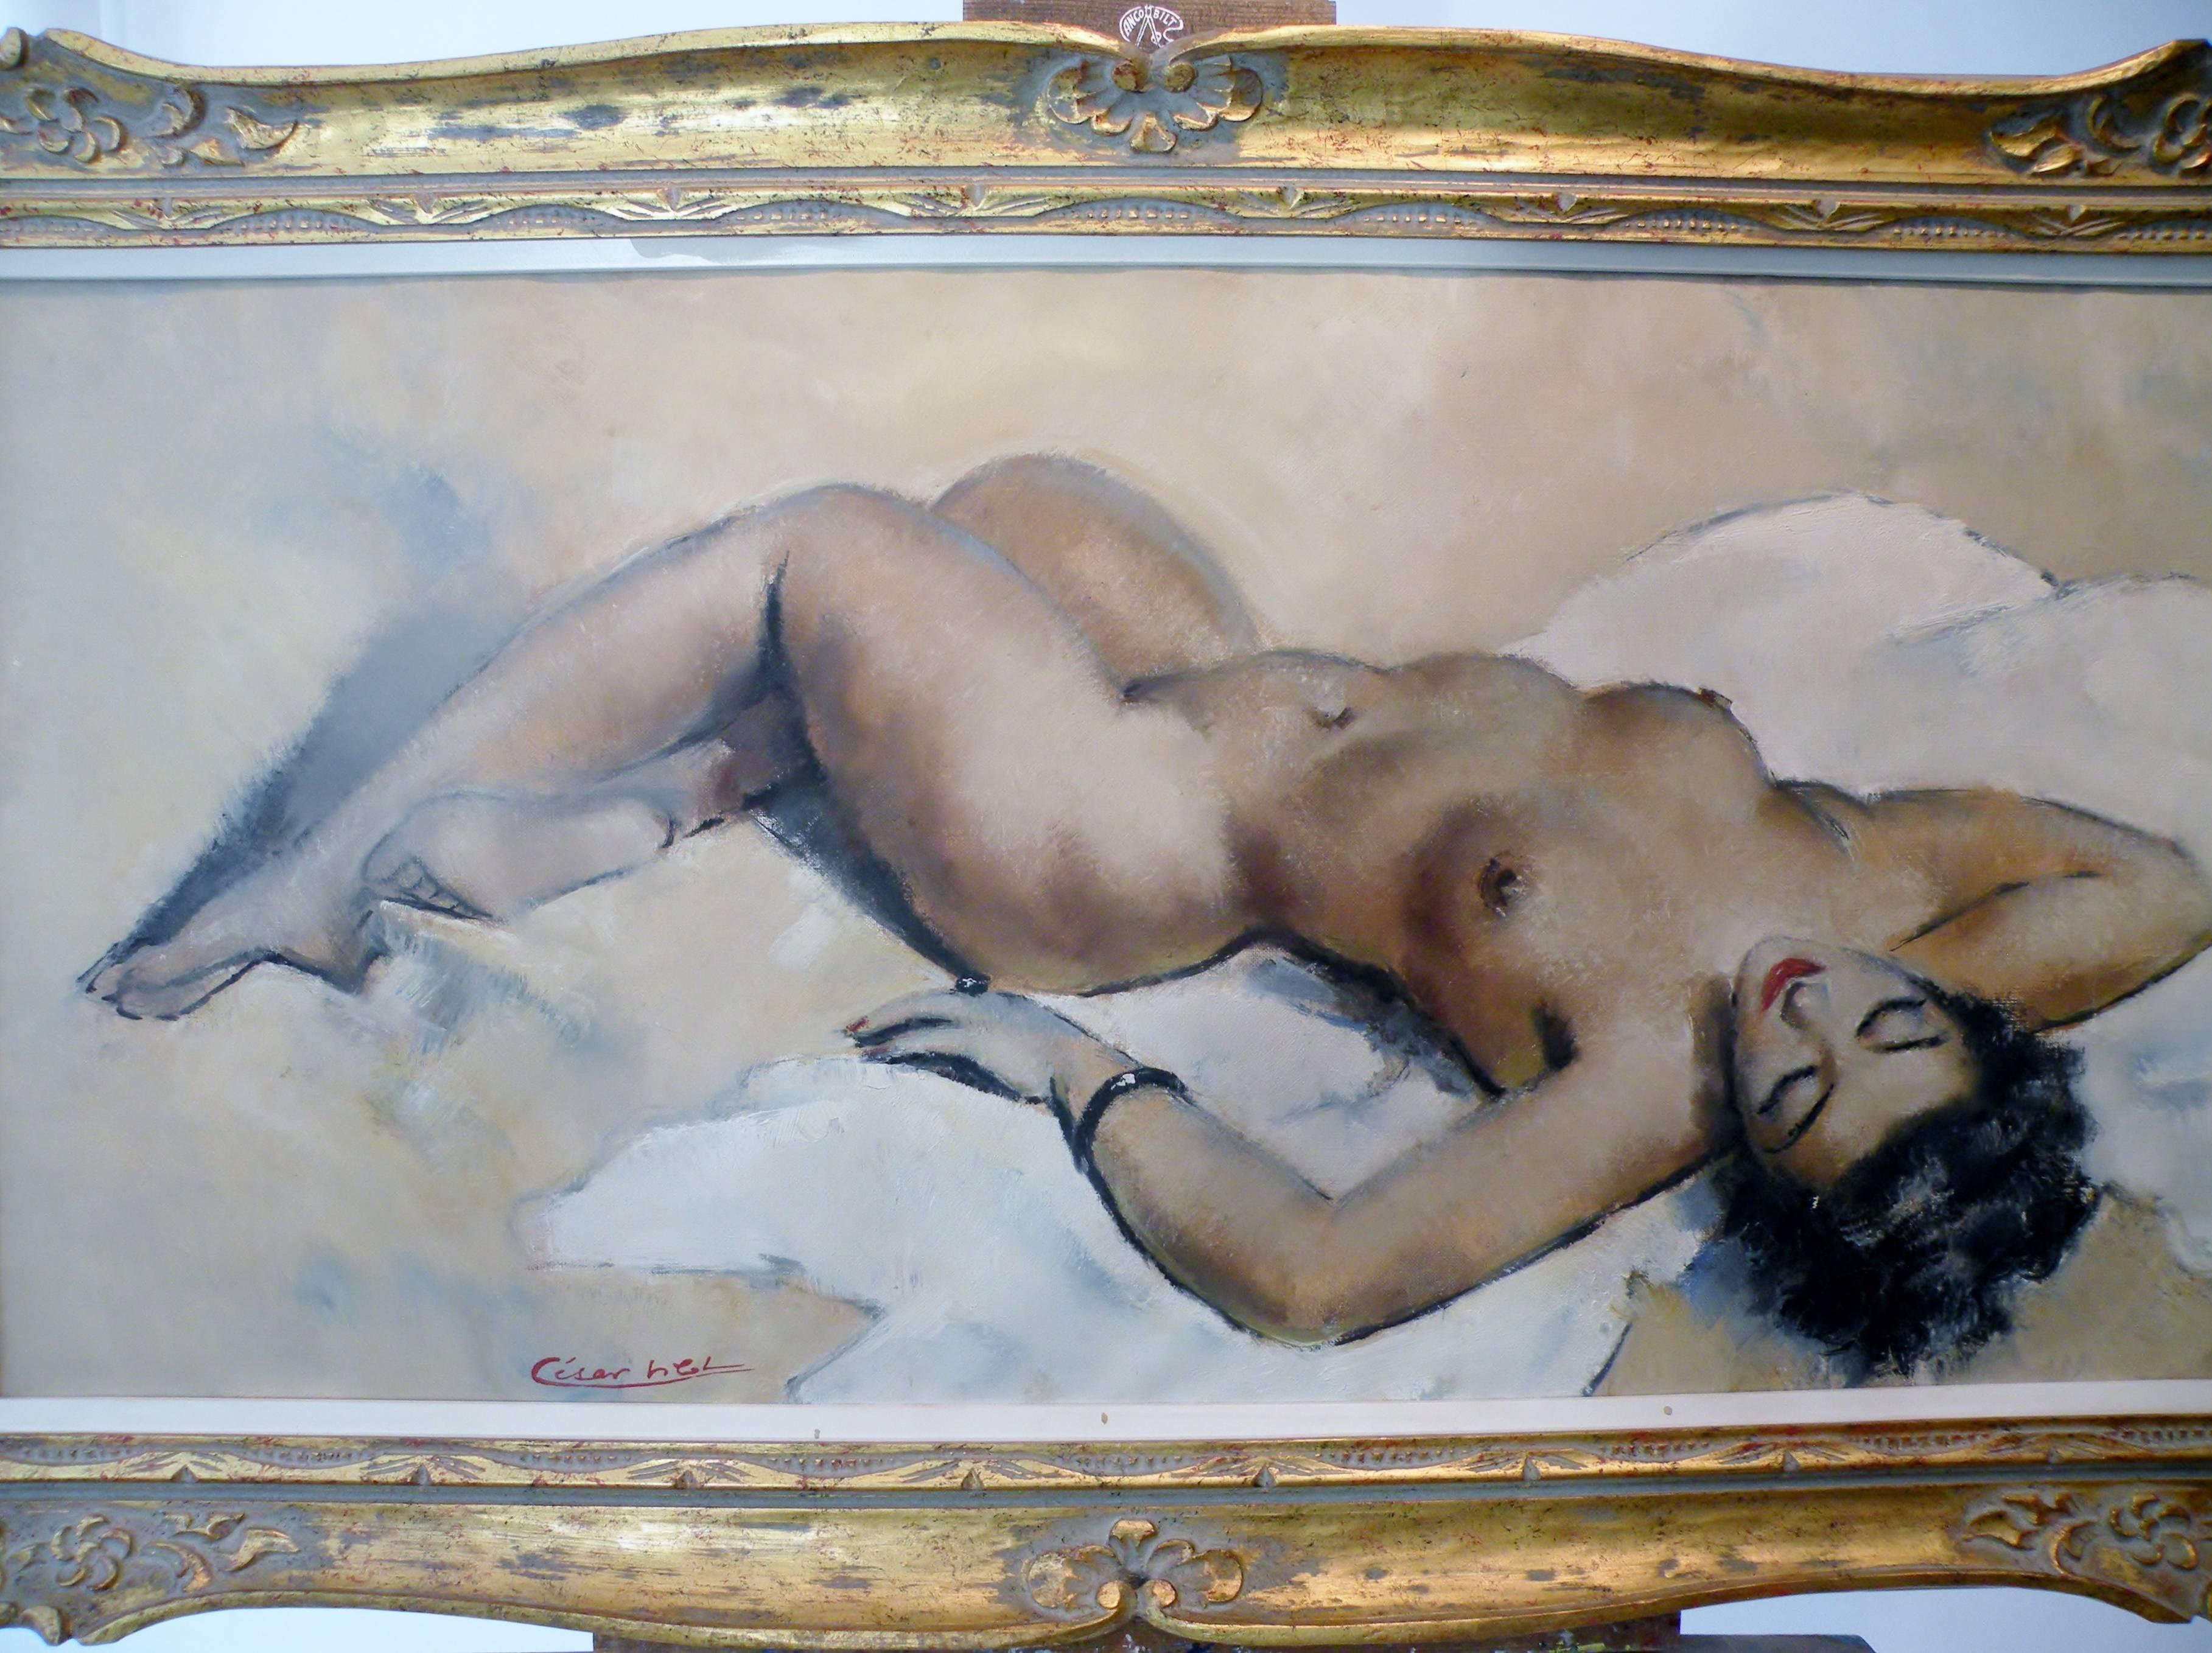 French Midcentury pin-up nude oil on canvas painting of a curvaceous young woman in reclining seductively by the artist Cesar Vitol. Painting approx. 39